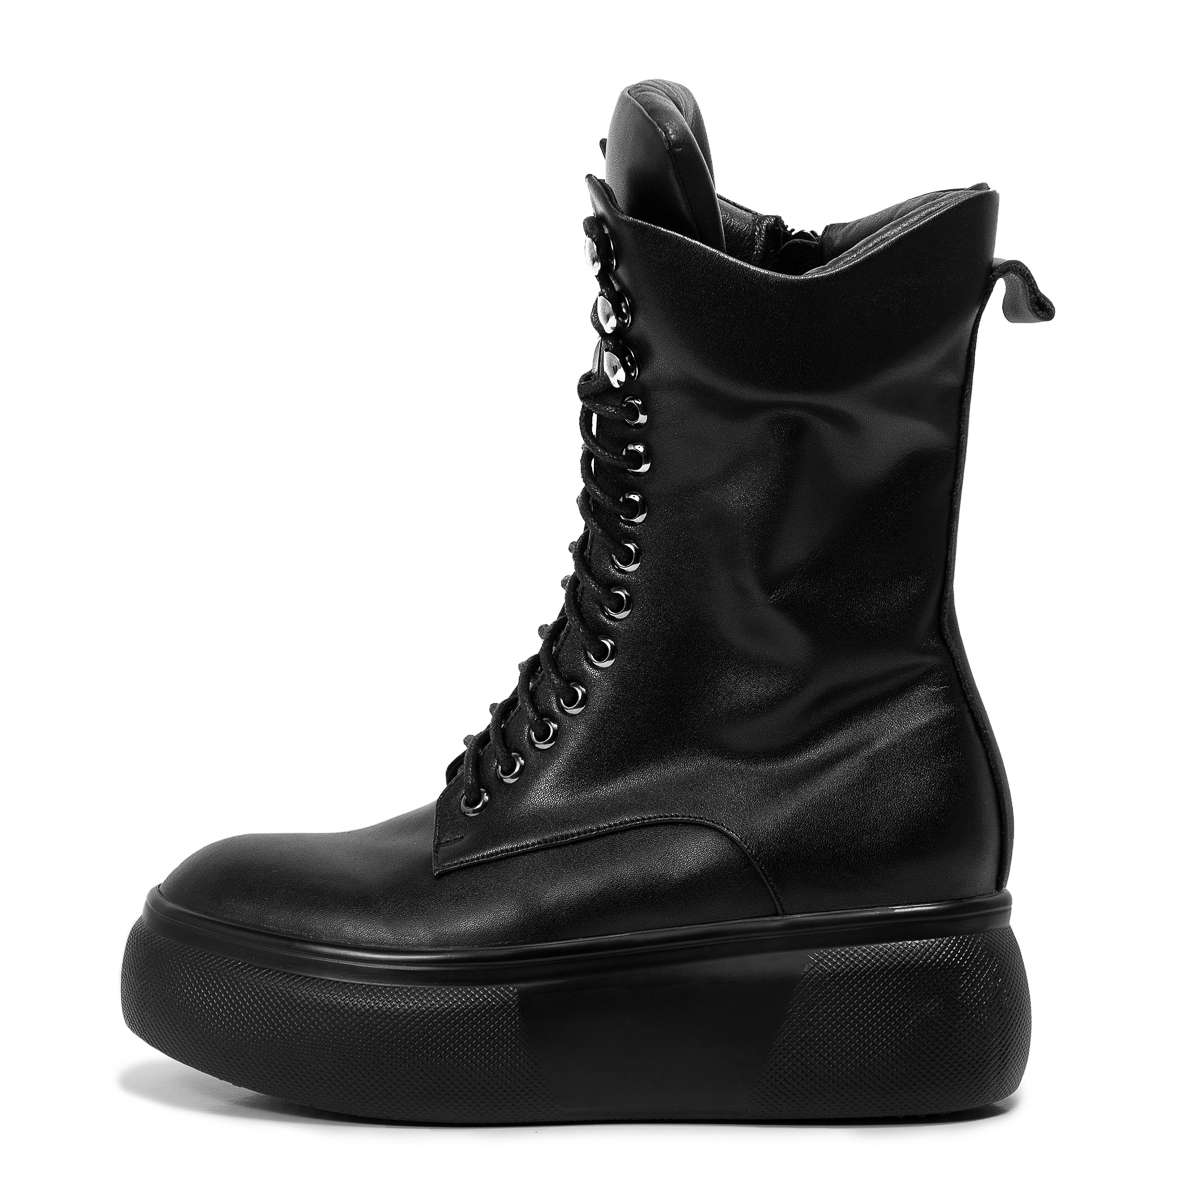 GLAM2 black Leather sneaker boots - Glamazons